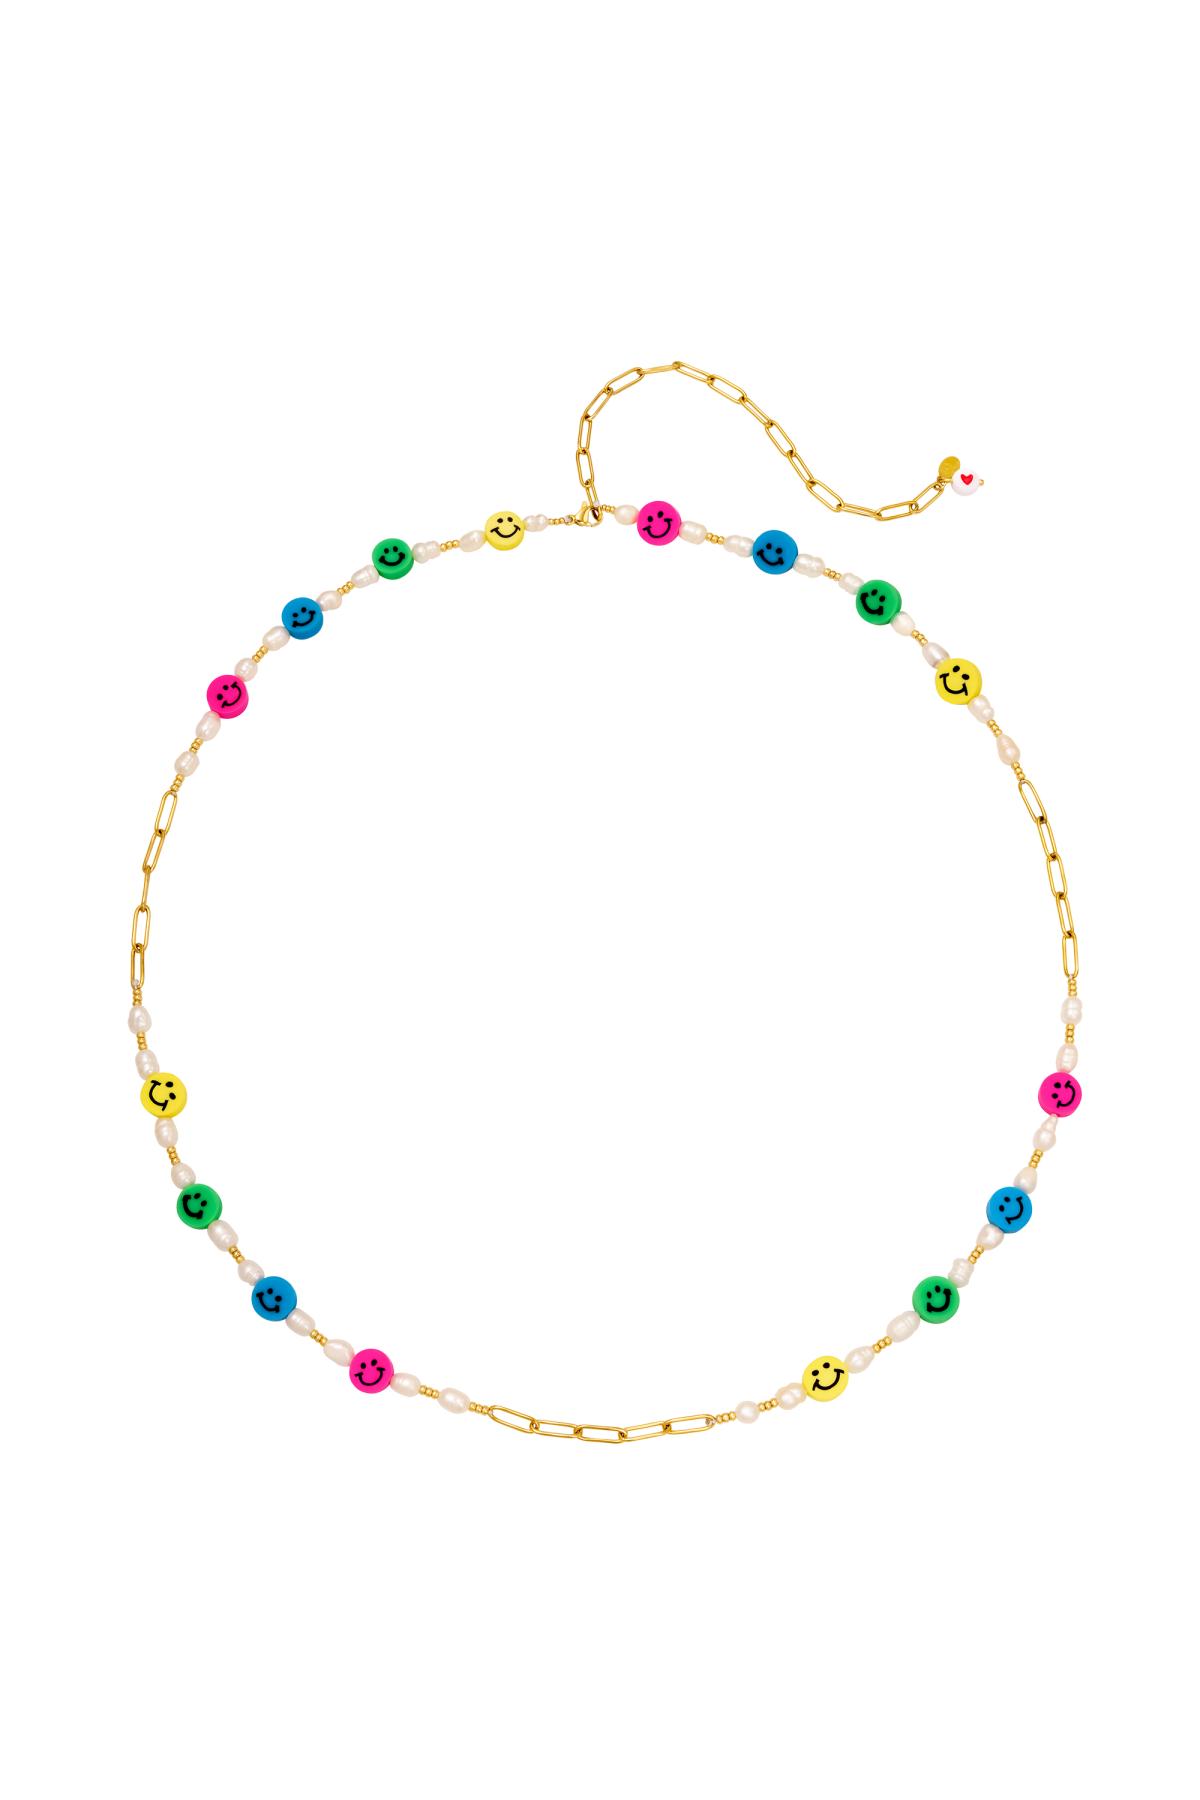 Waist chain smileys & pearls Gold Stainless Steel h5 